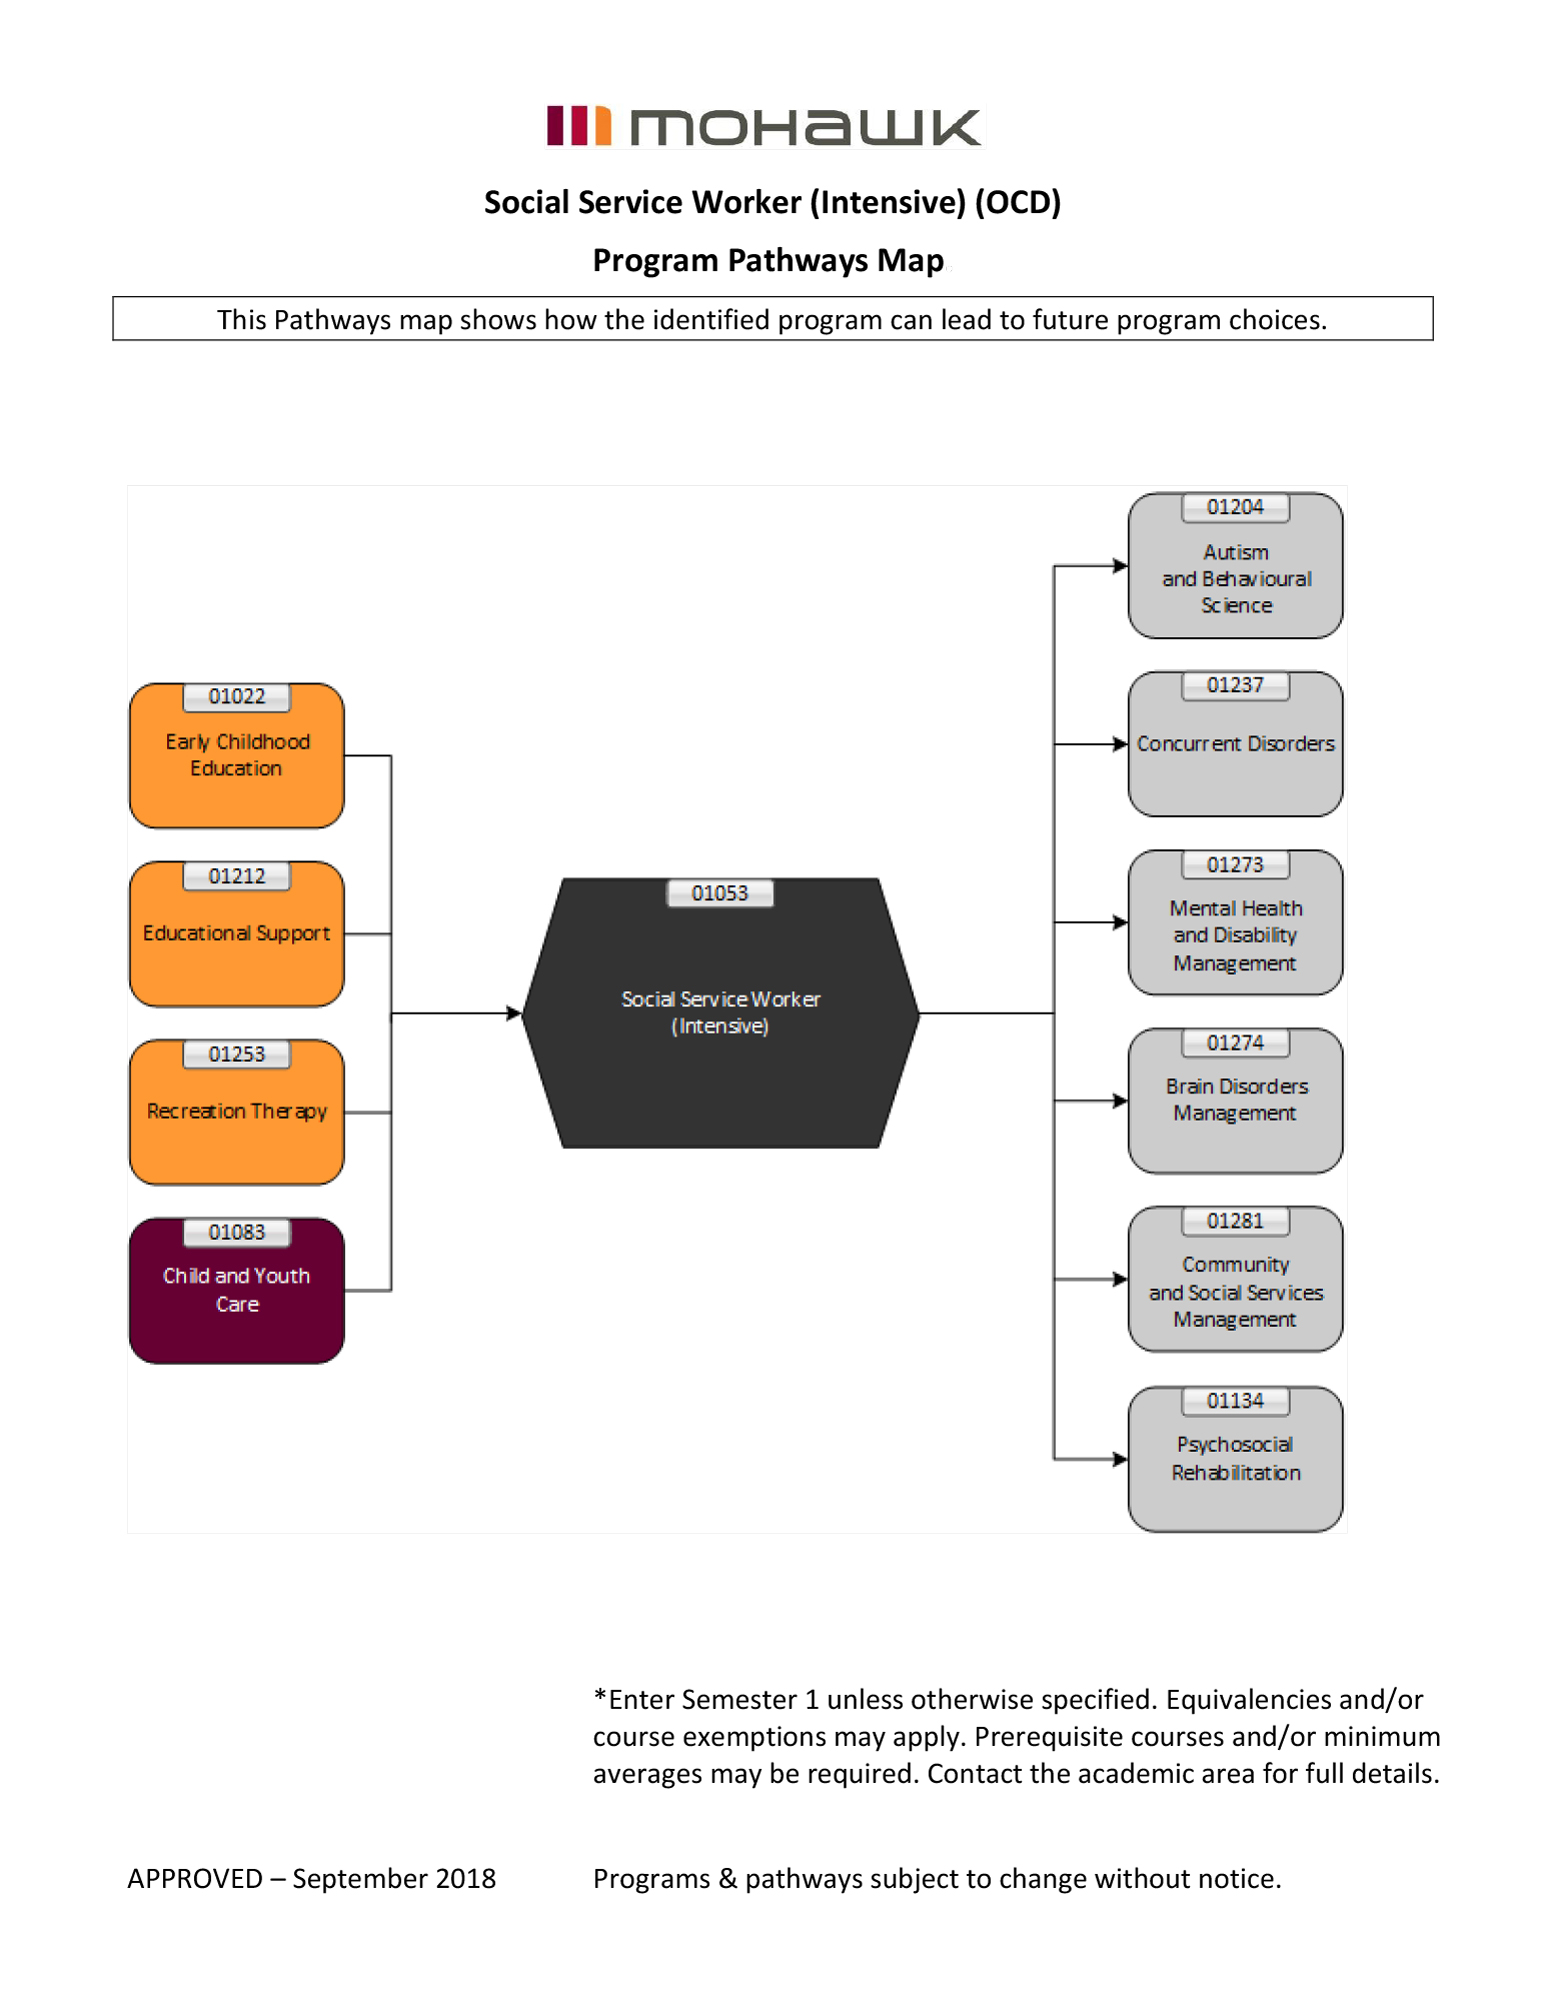 Social Service Worker Intensive pathways map